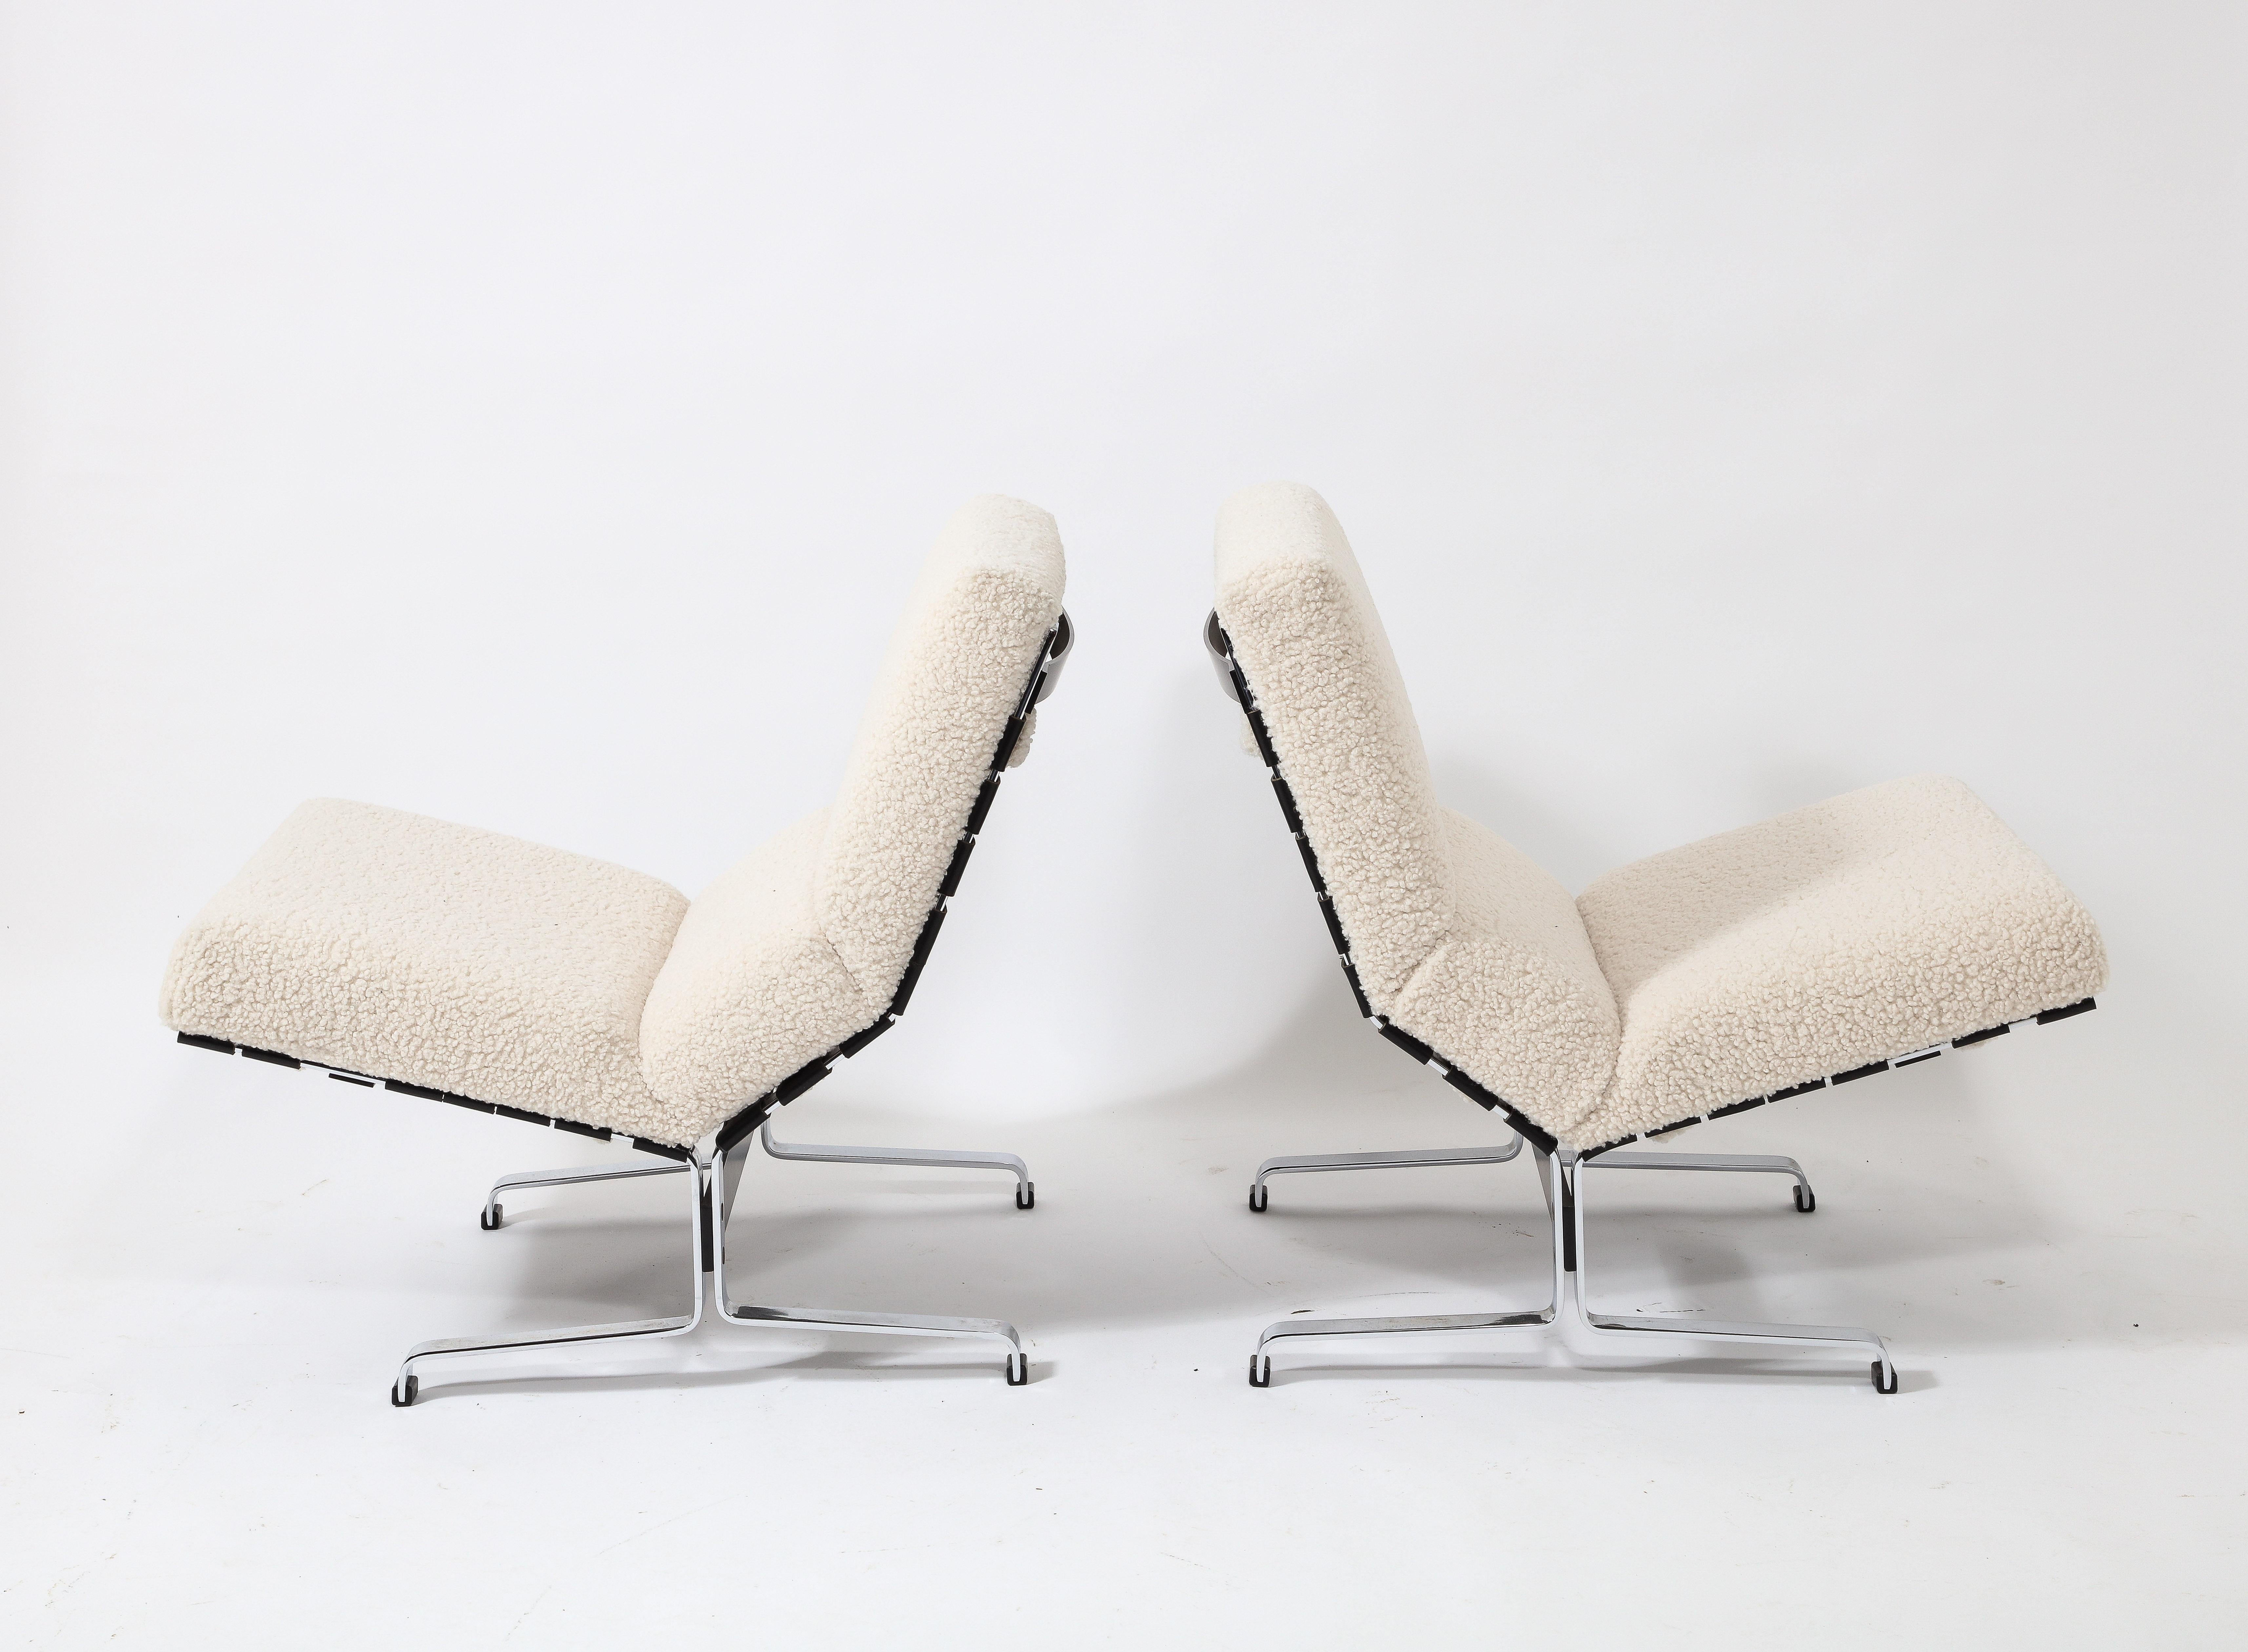 Etienne Fermigier Pair of Slipper Lounge Chairs in Cream, France 1960's For Sale 3